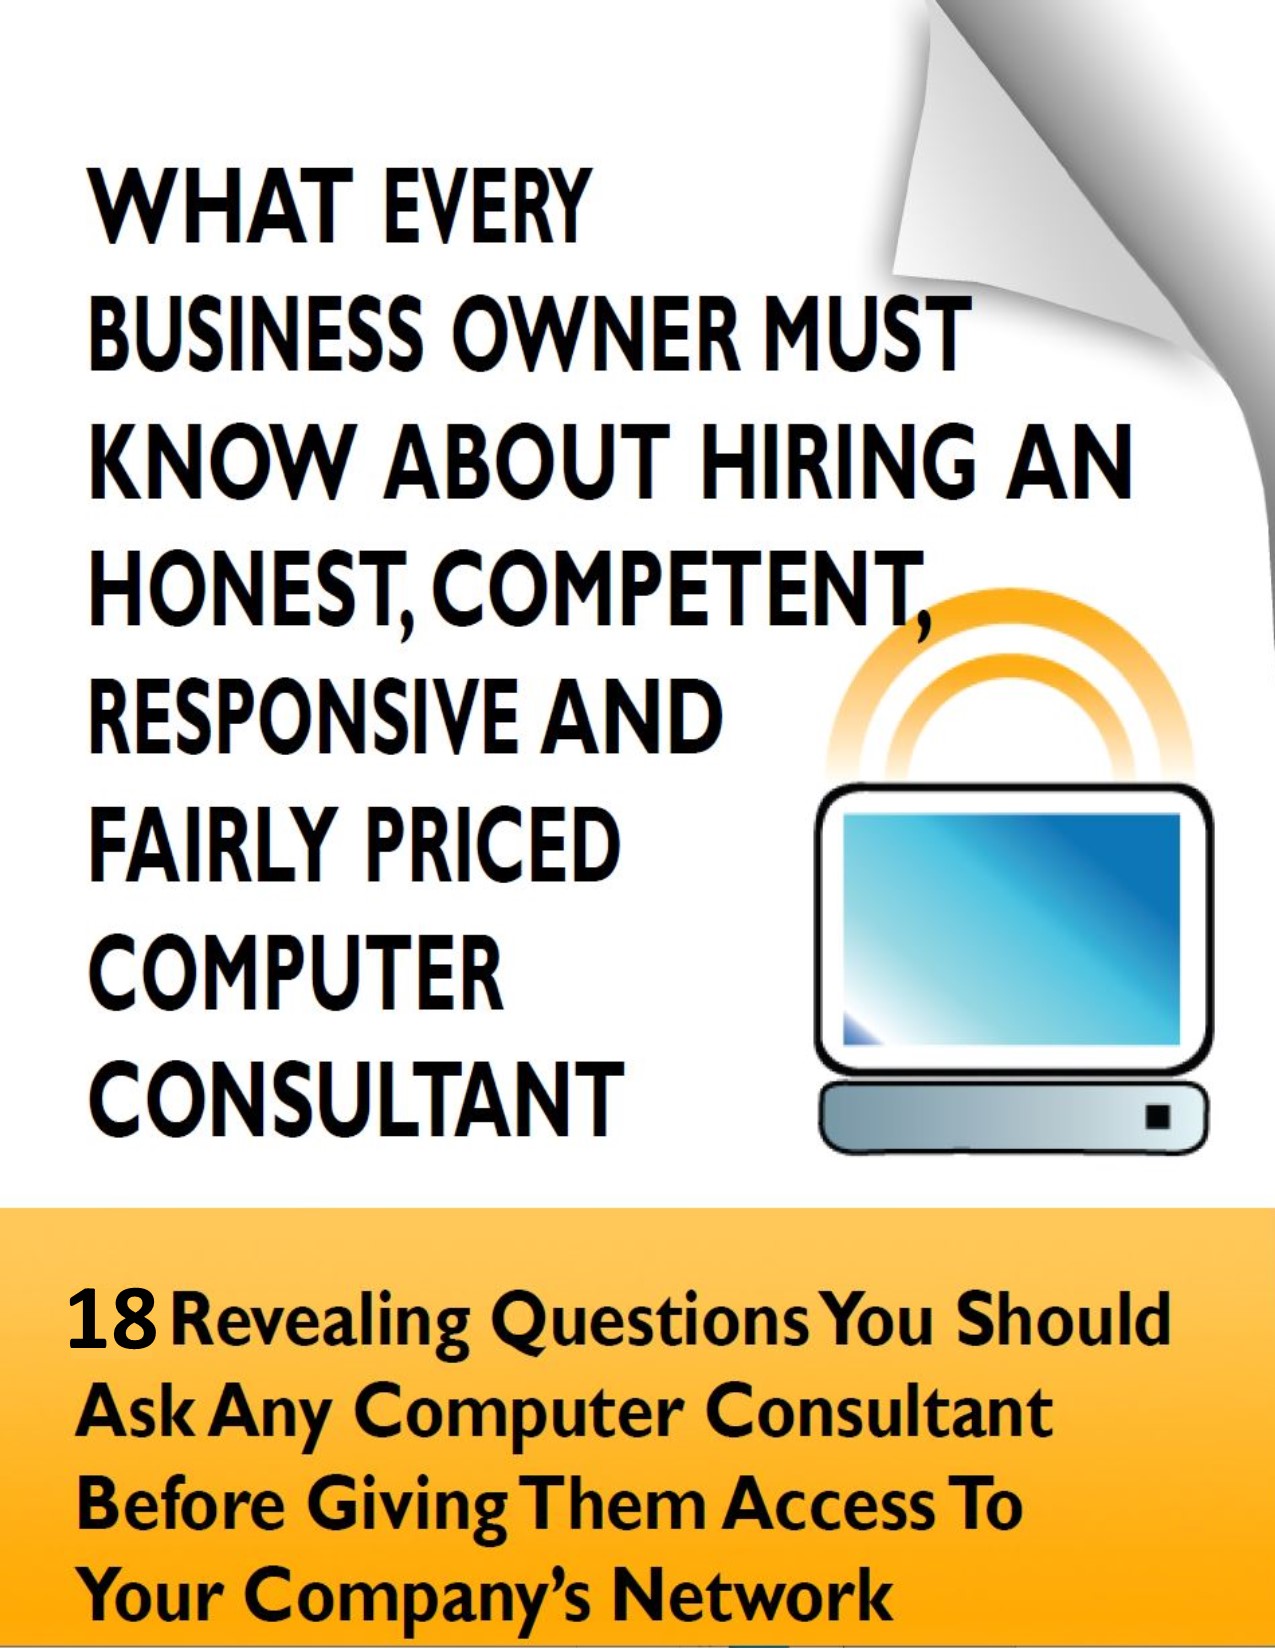 18 revealing questions to ask to IT Consultant before giving them access to your company's network